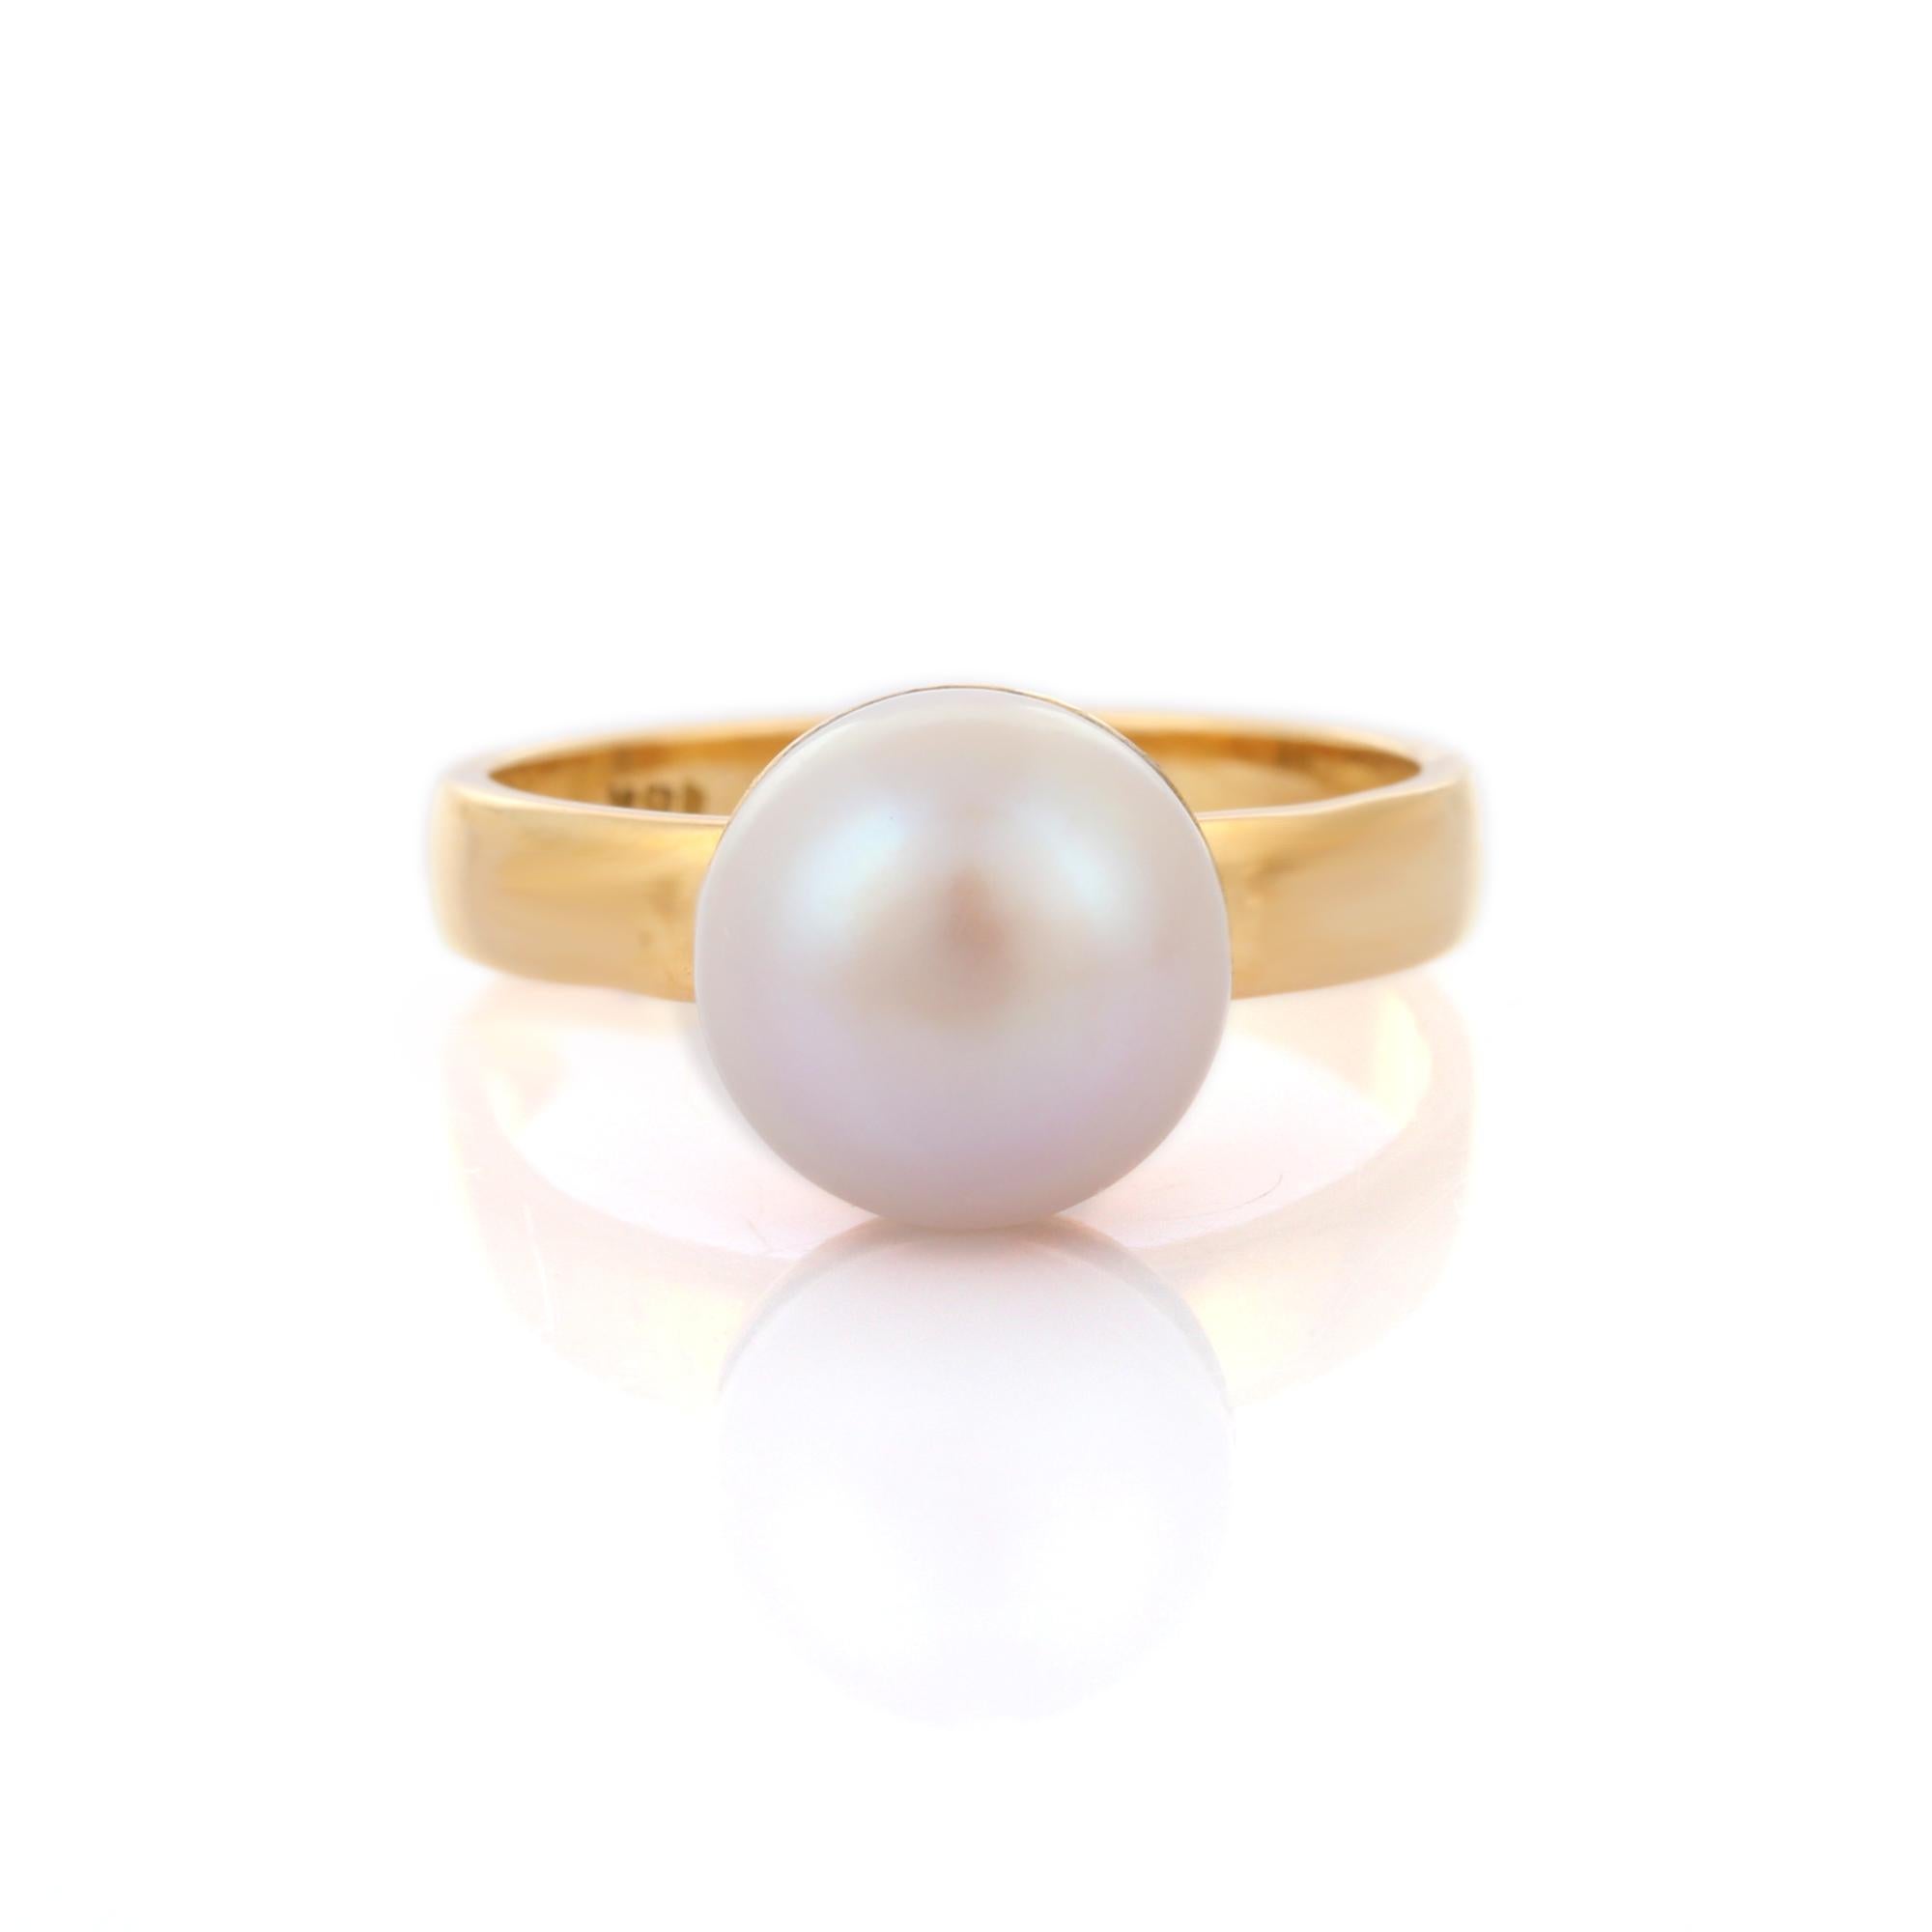 For Sale:  4.3 Carat Pearl Solitaire Ring in 18K Yellow Gold  7